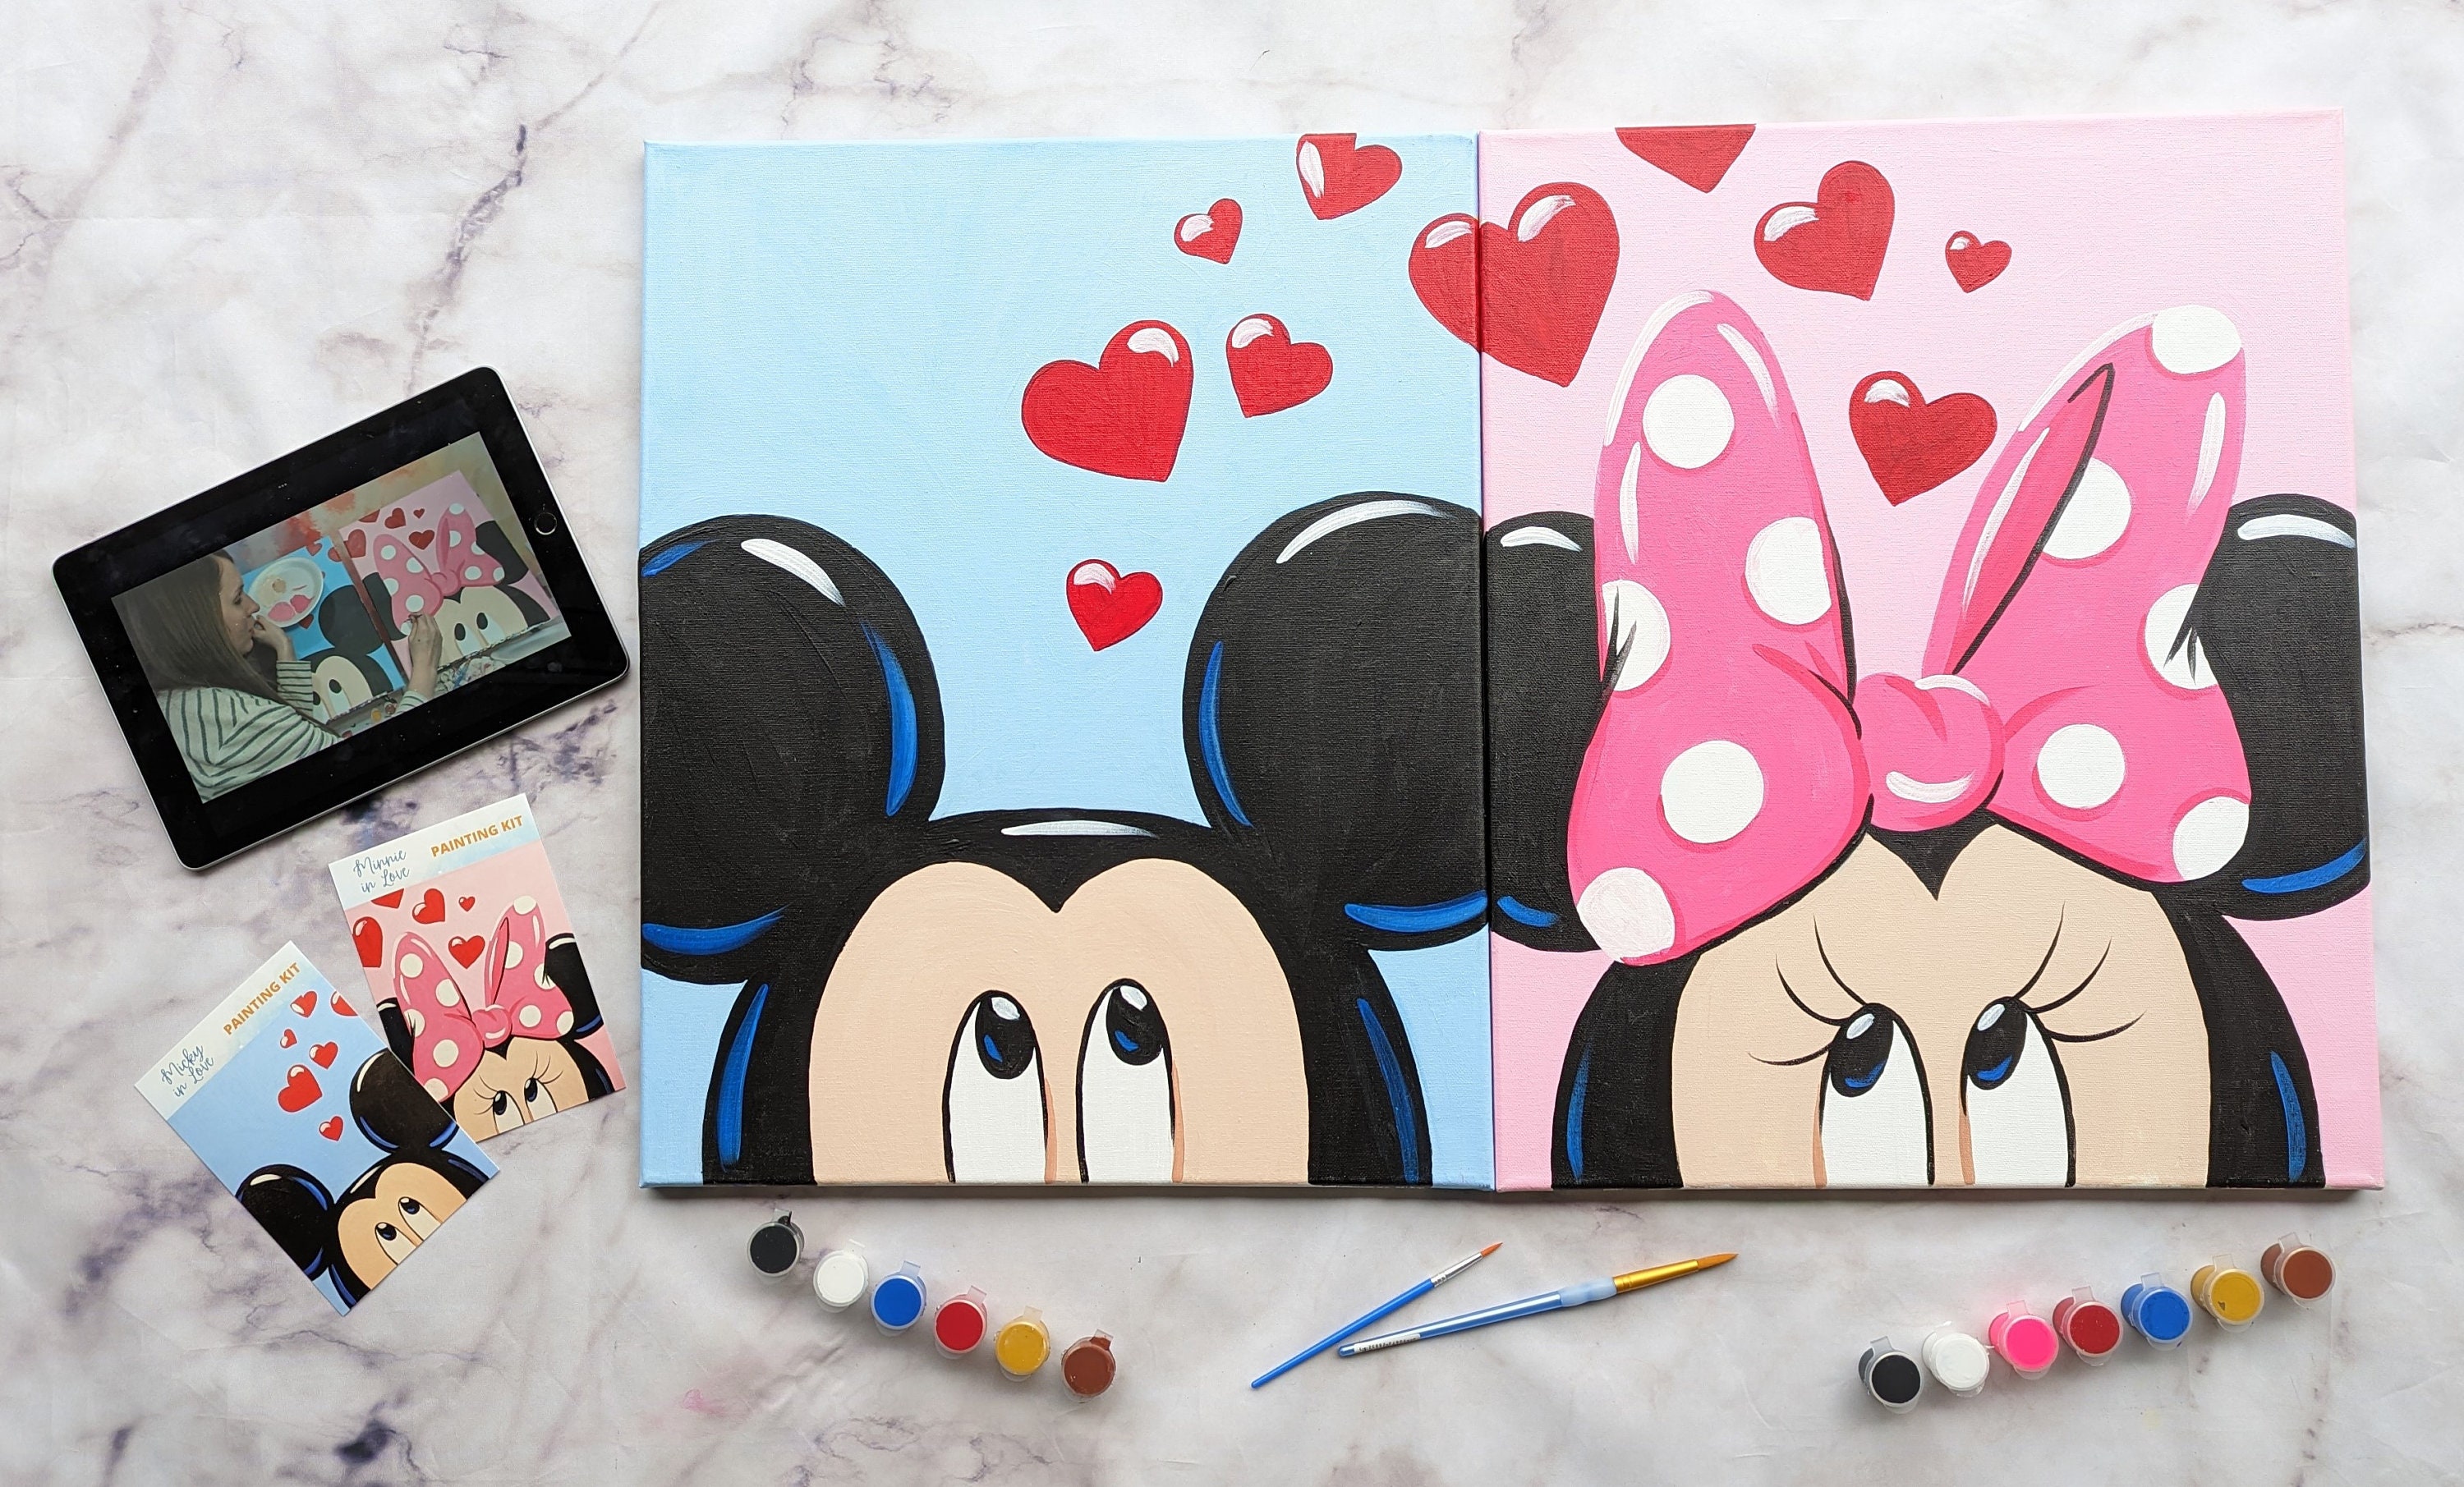 DIY Couples Canvas Painting Kit/ Includes 2 Canvases, Supplies Link to  Instructional Video/ Mothers Day Activity / Date Night 